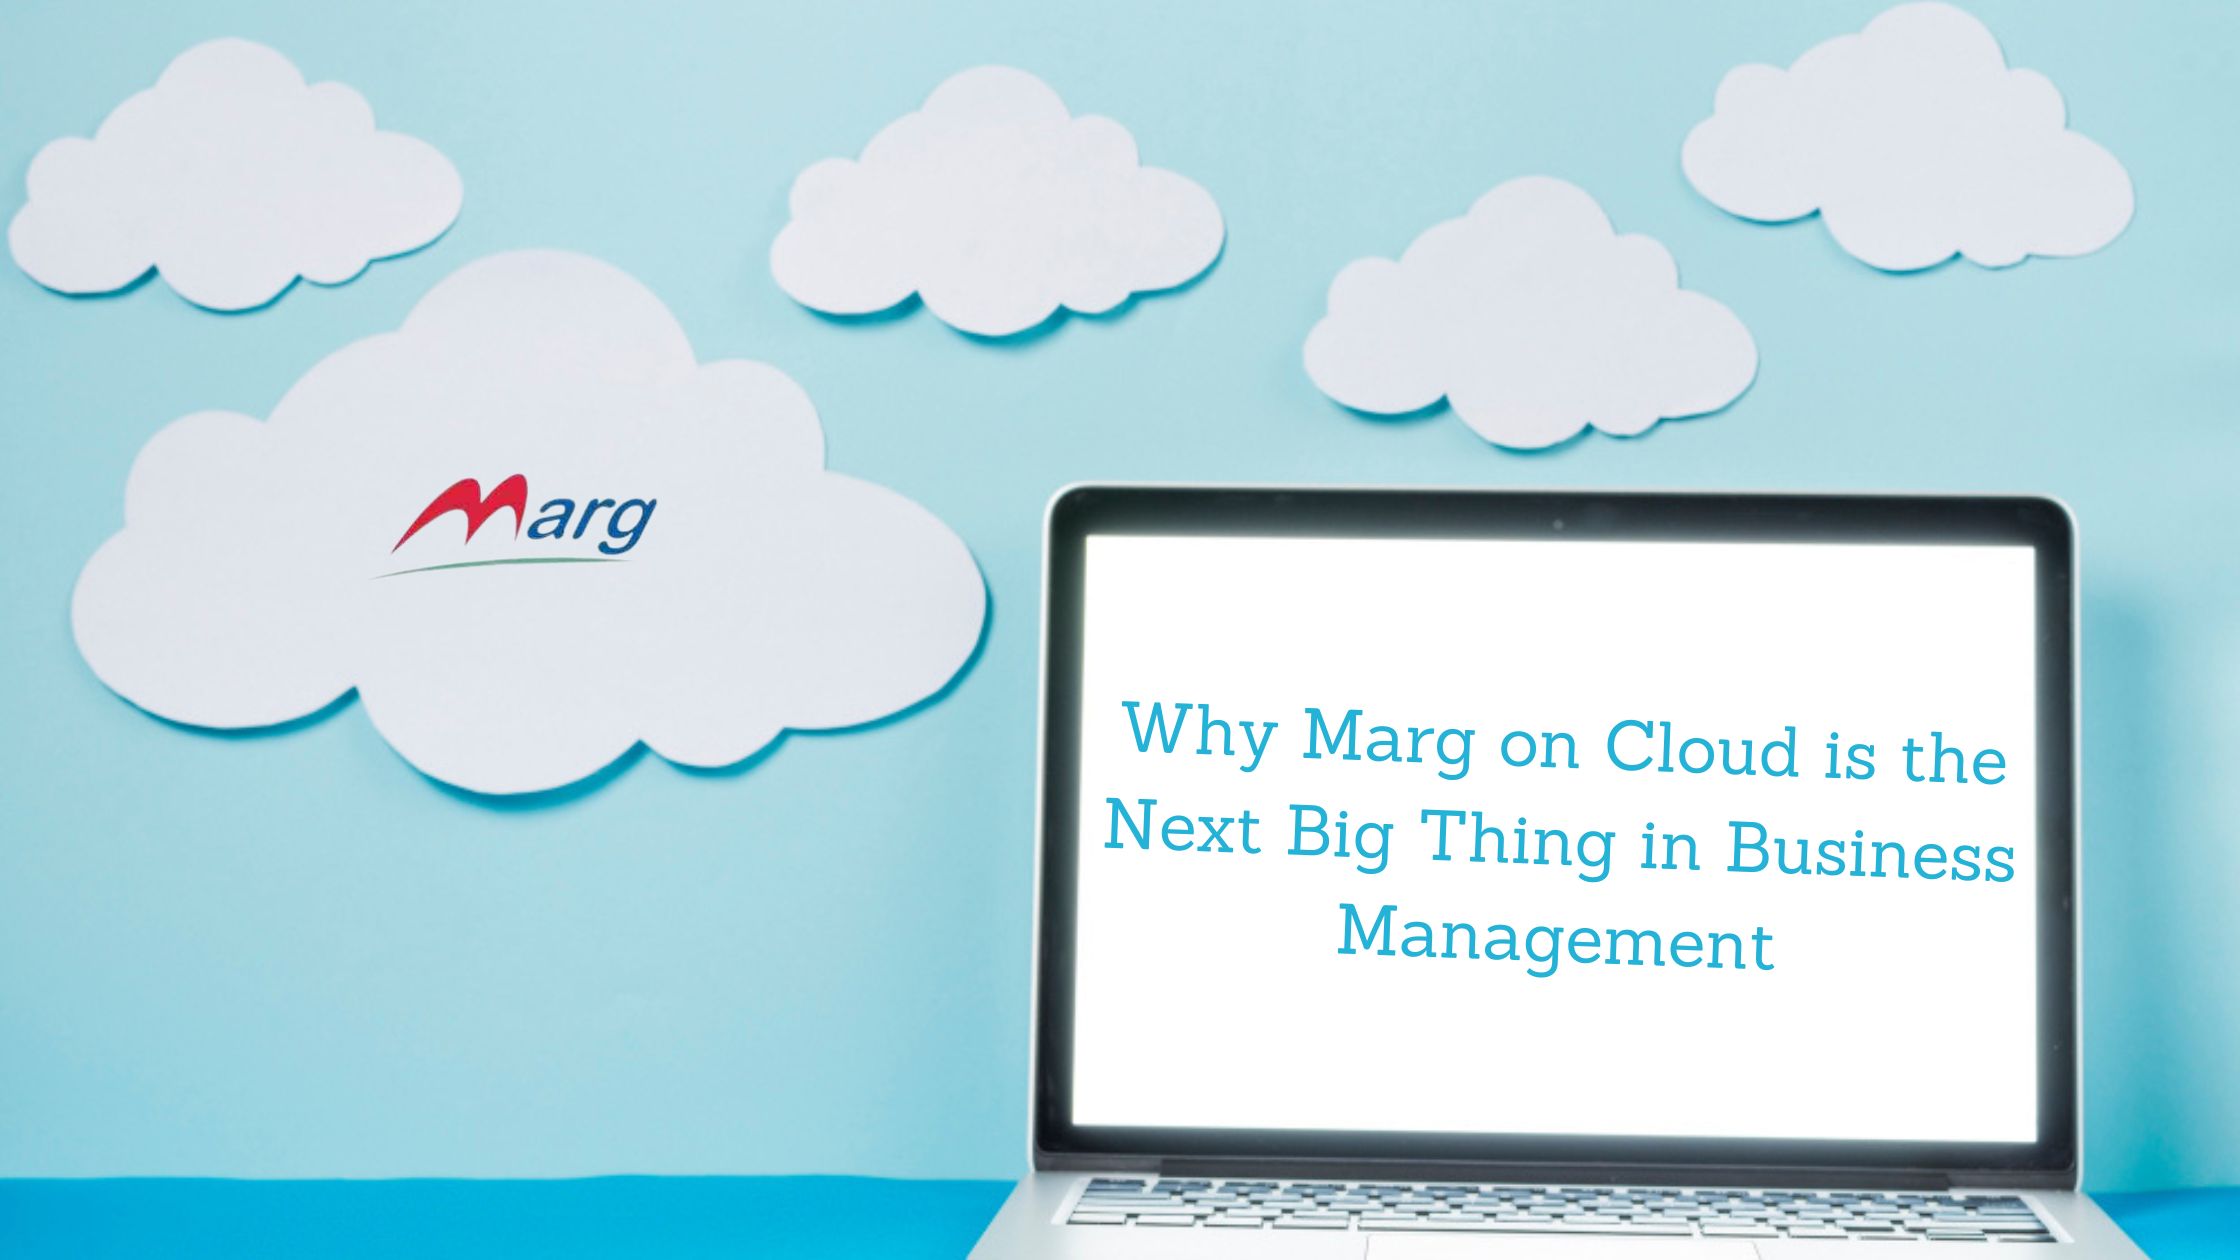 Why Marg on Cloud is the Next Big Thing in Business Management